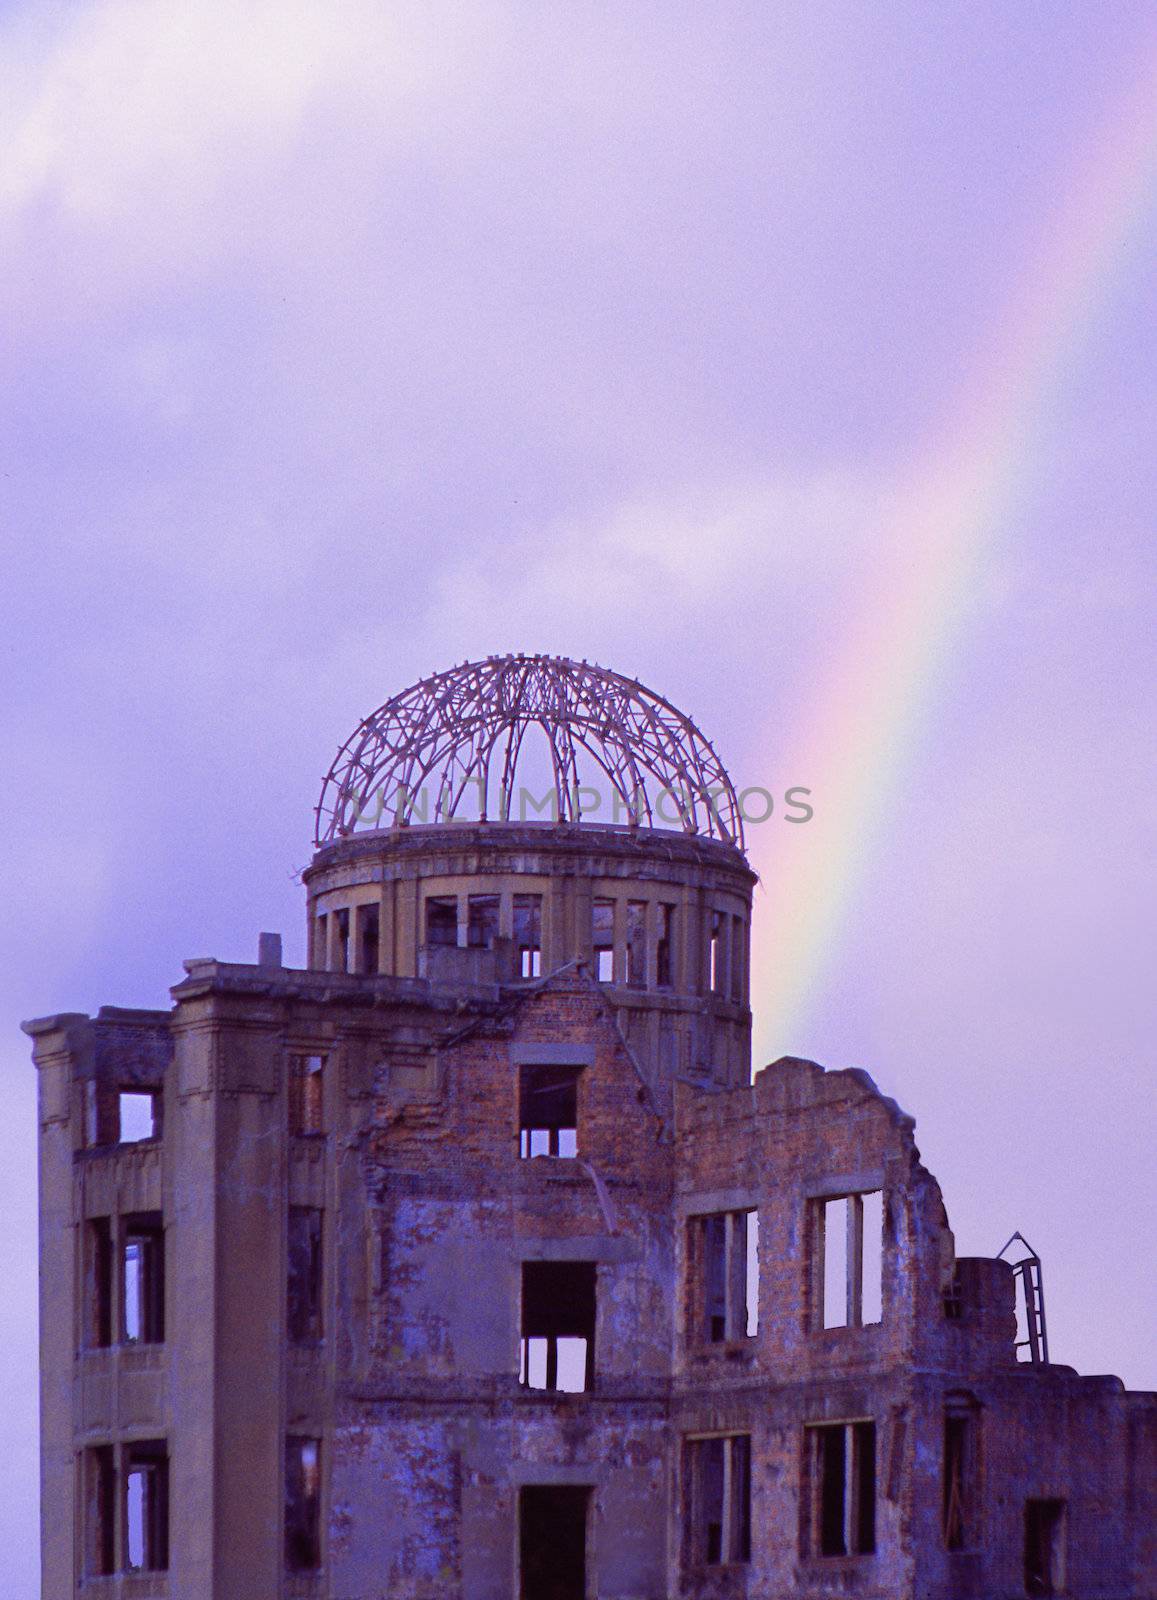 bomb Dome Hiroshima Japan with rainbow in background by hotflash2001